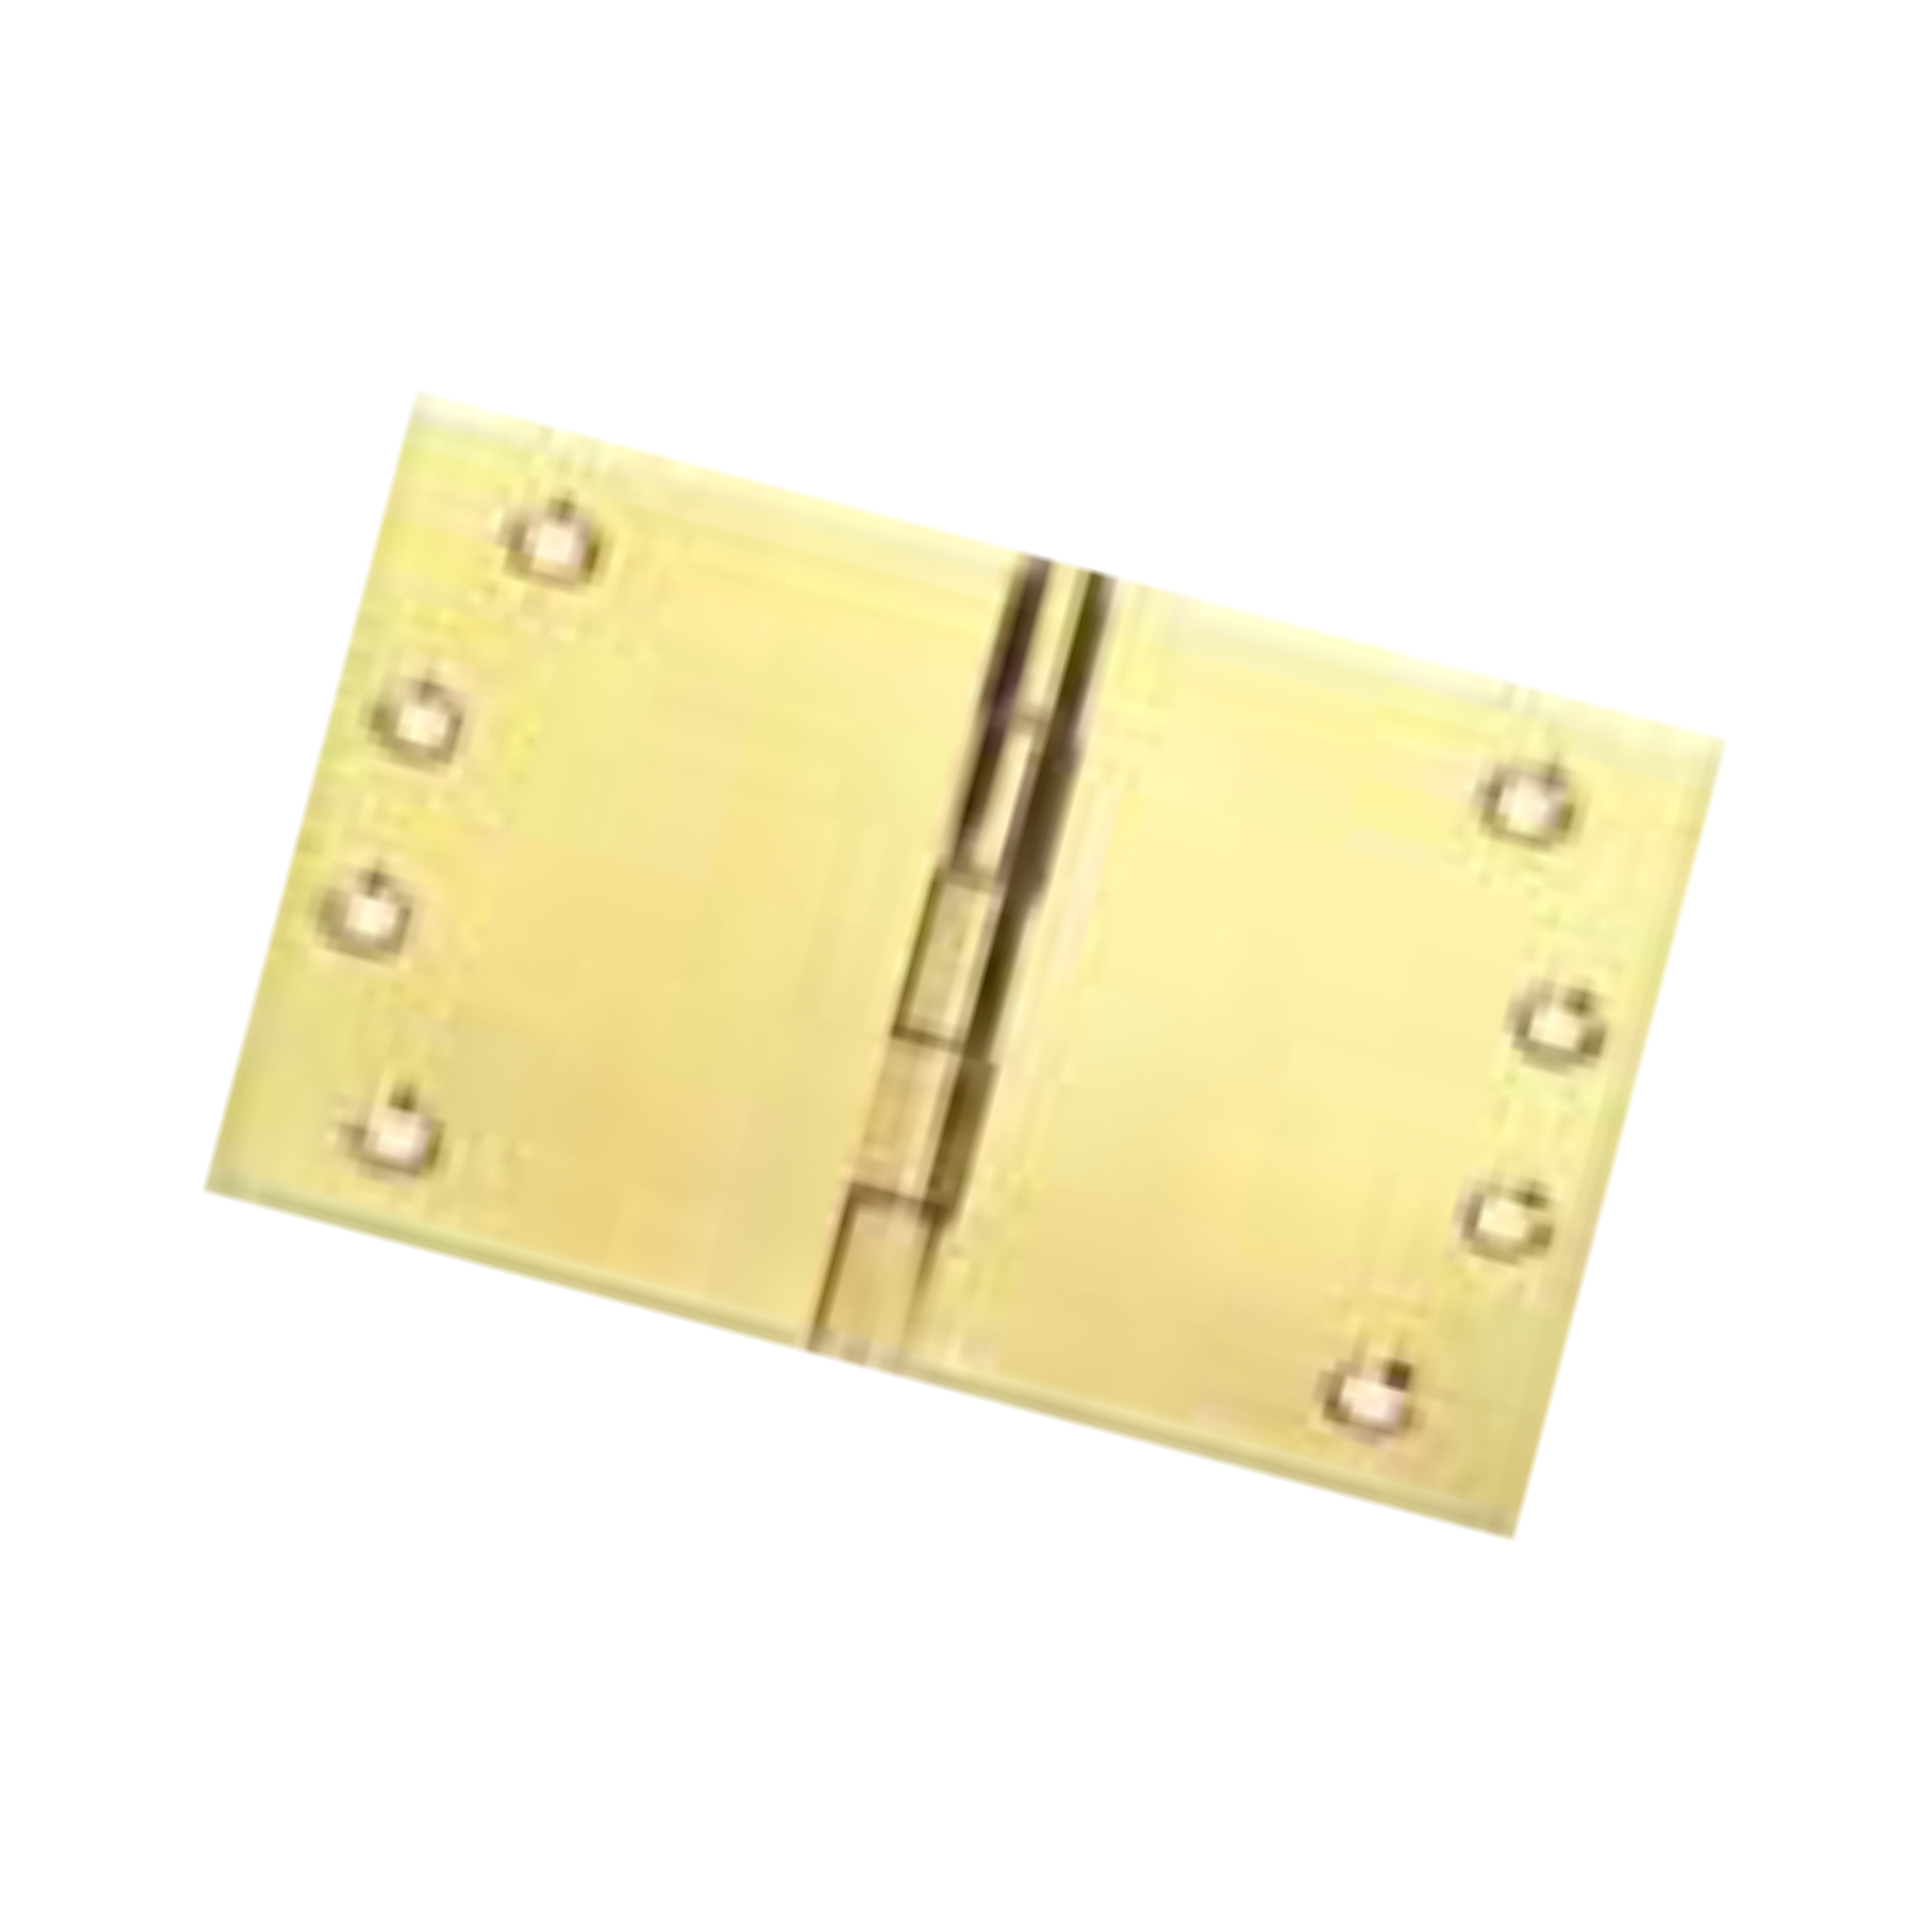 FH230X3, Projection Hinge, 2 x Hinges (1 Pair), 100mm (h) x 230mm (w) x 3.5mm (t), Satin, CISA